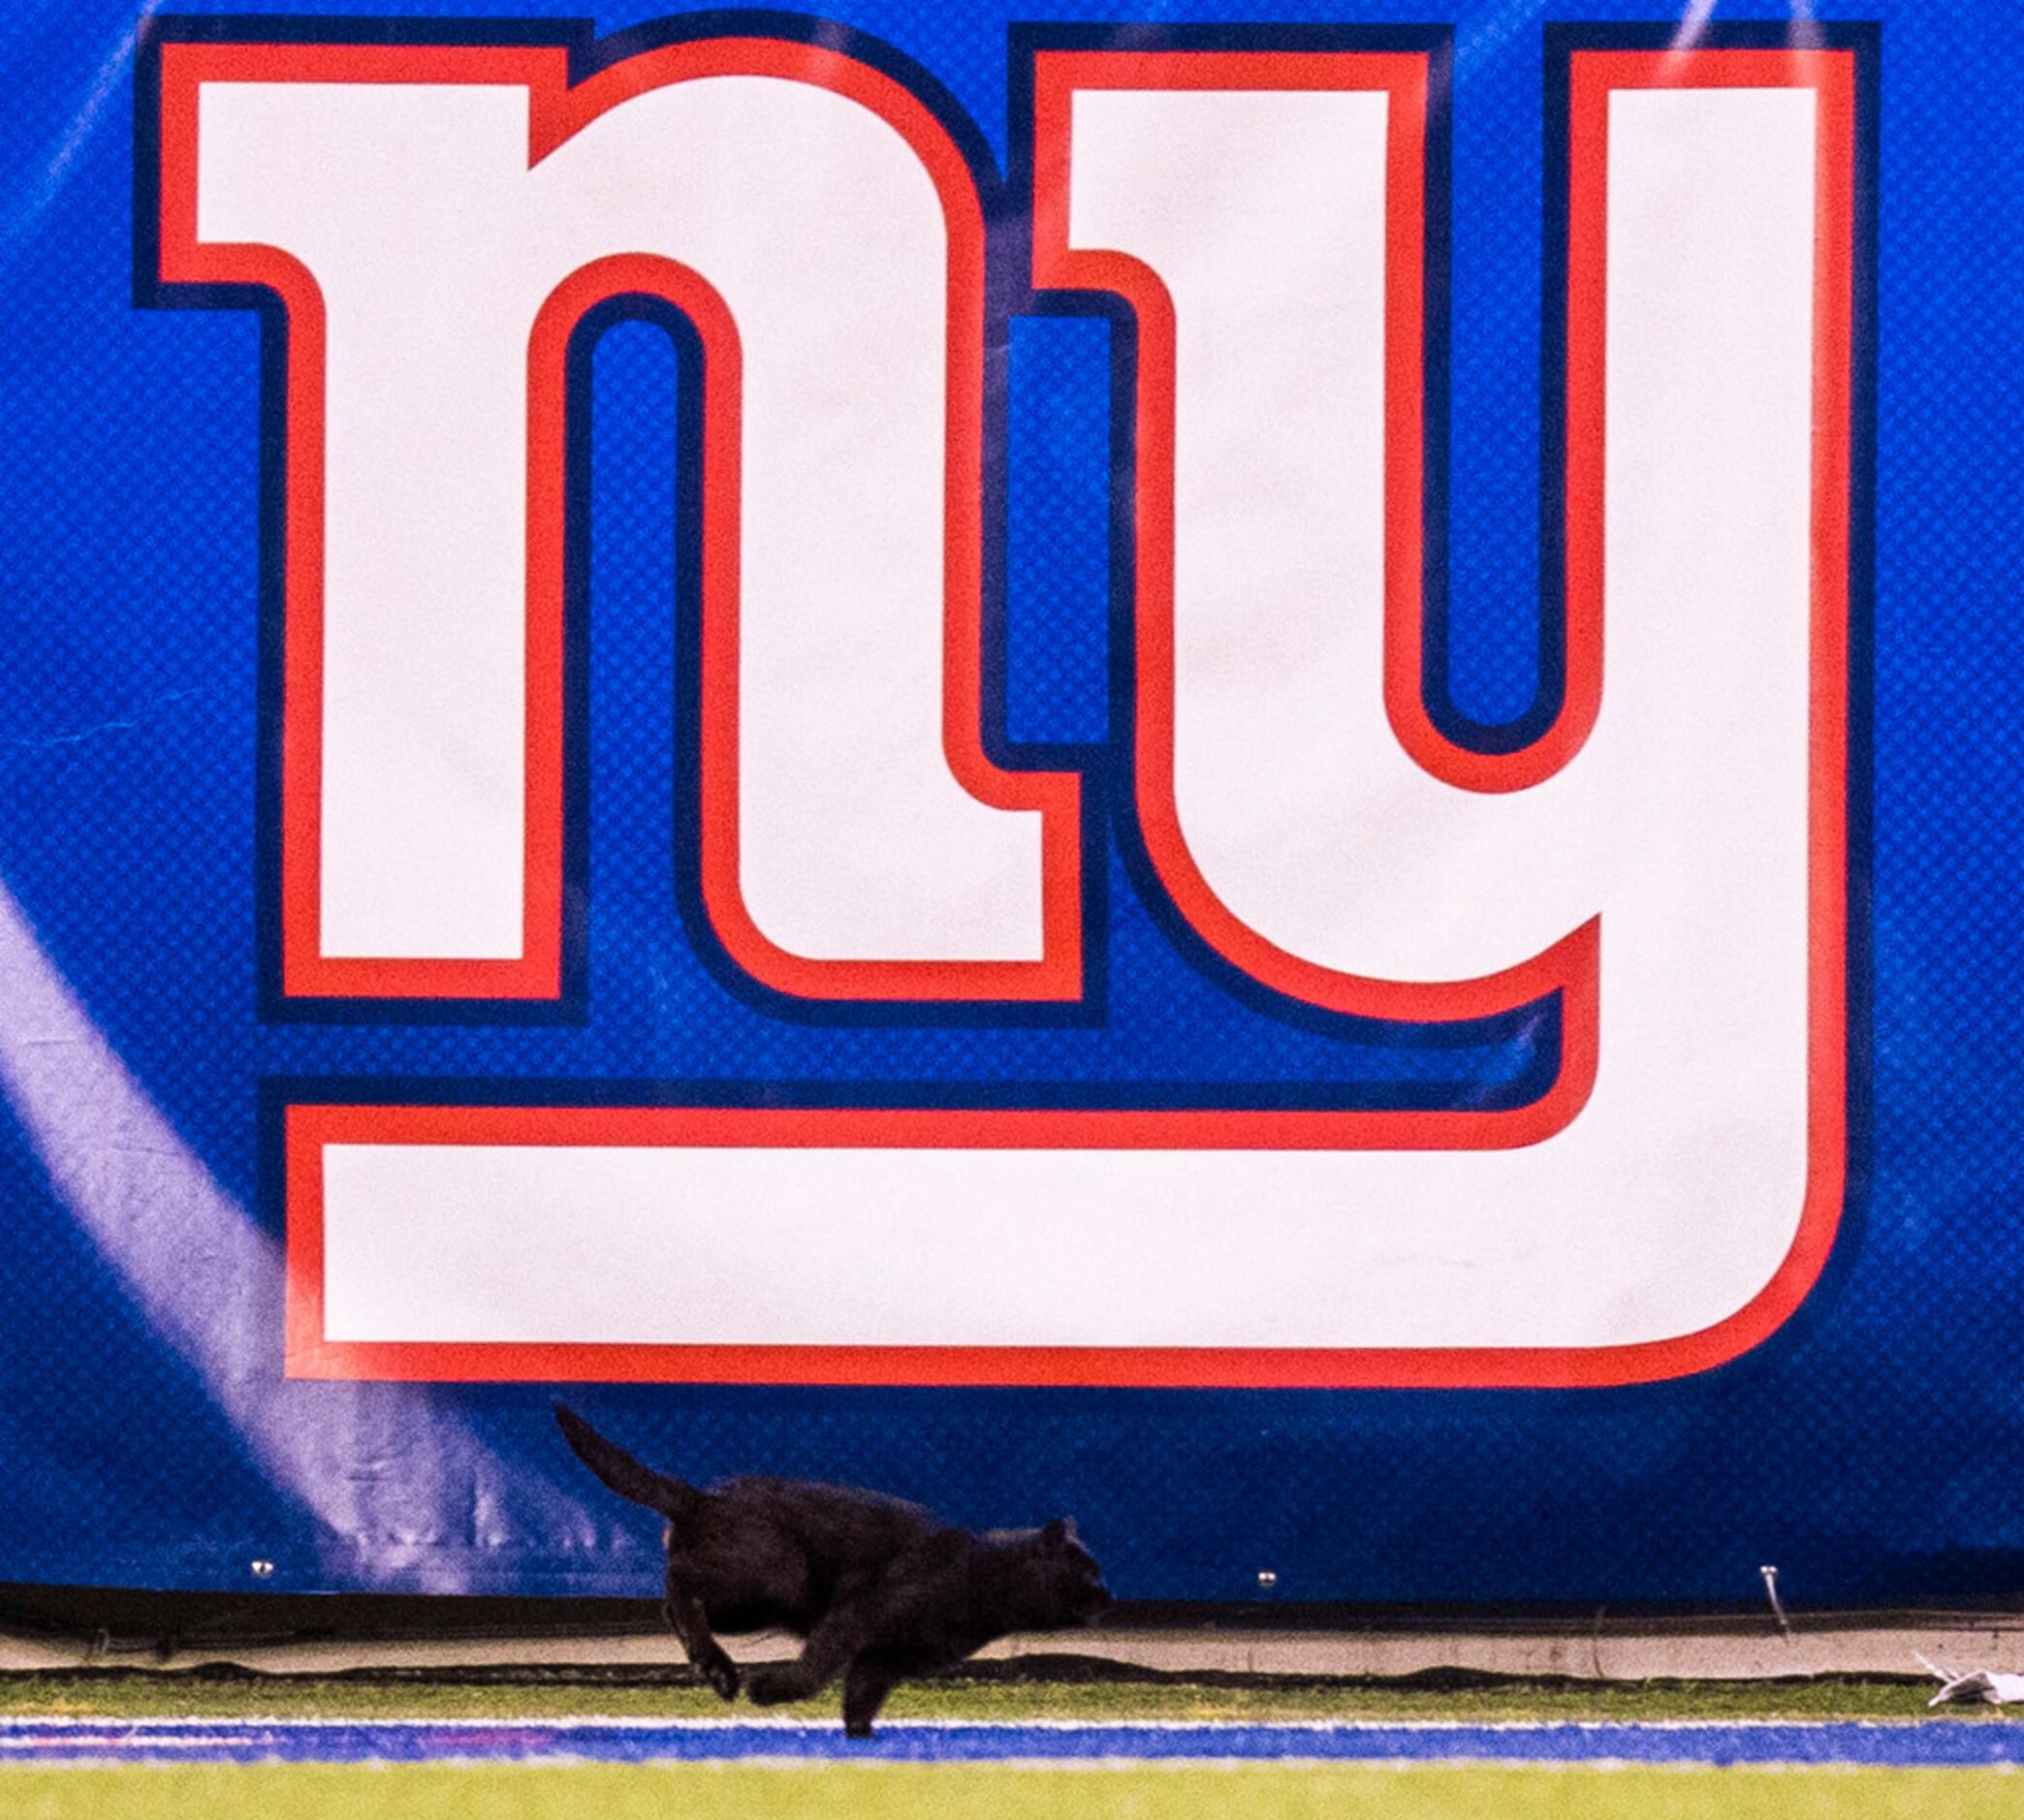 A black cat runs on the field during the second quarter of an NFL game between the Dallas...